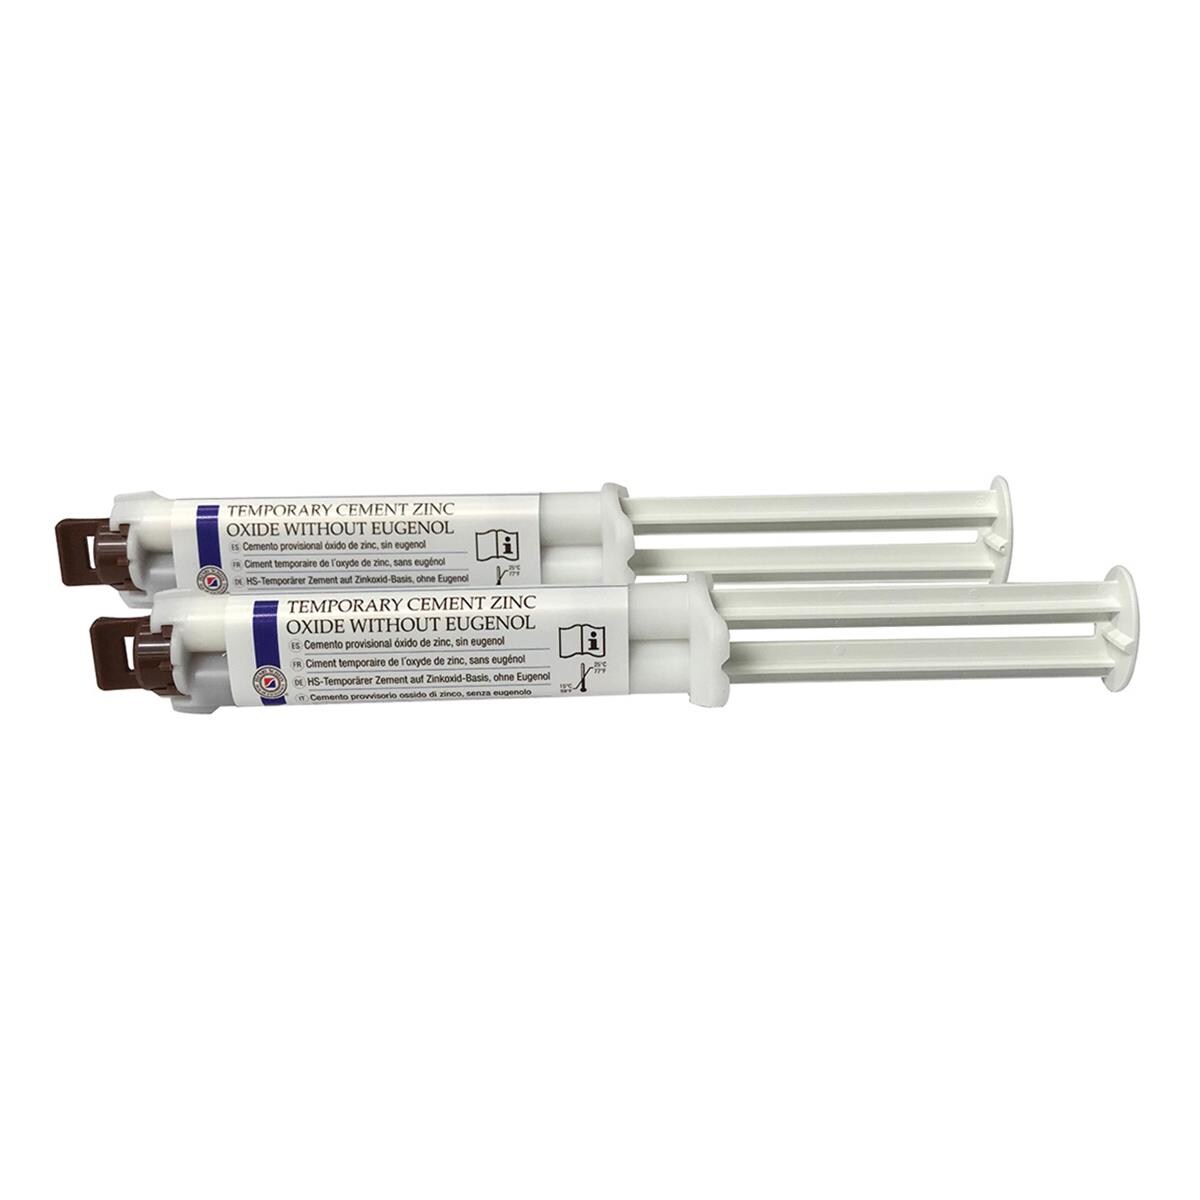 HS Temporary Cement Non Eugenol Automix Syringe 5ml 2pk